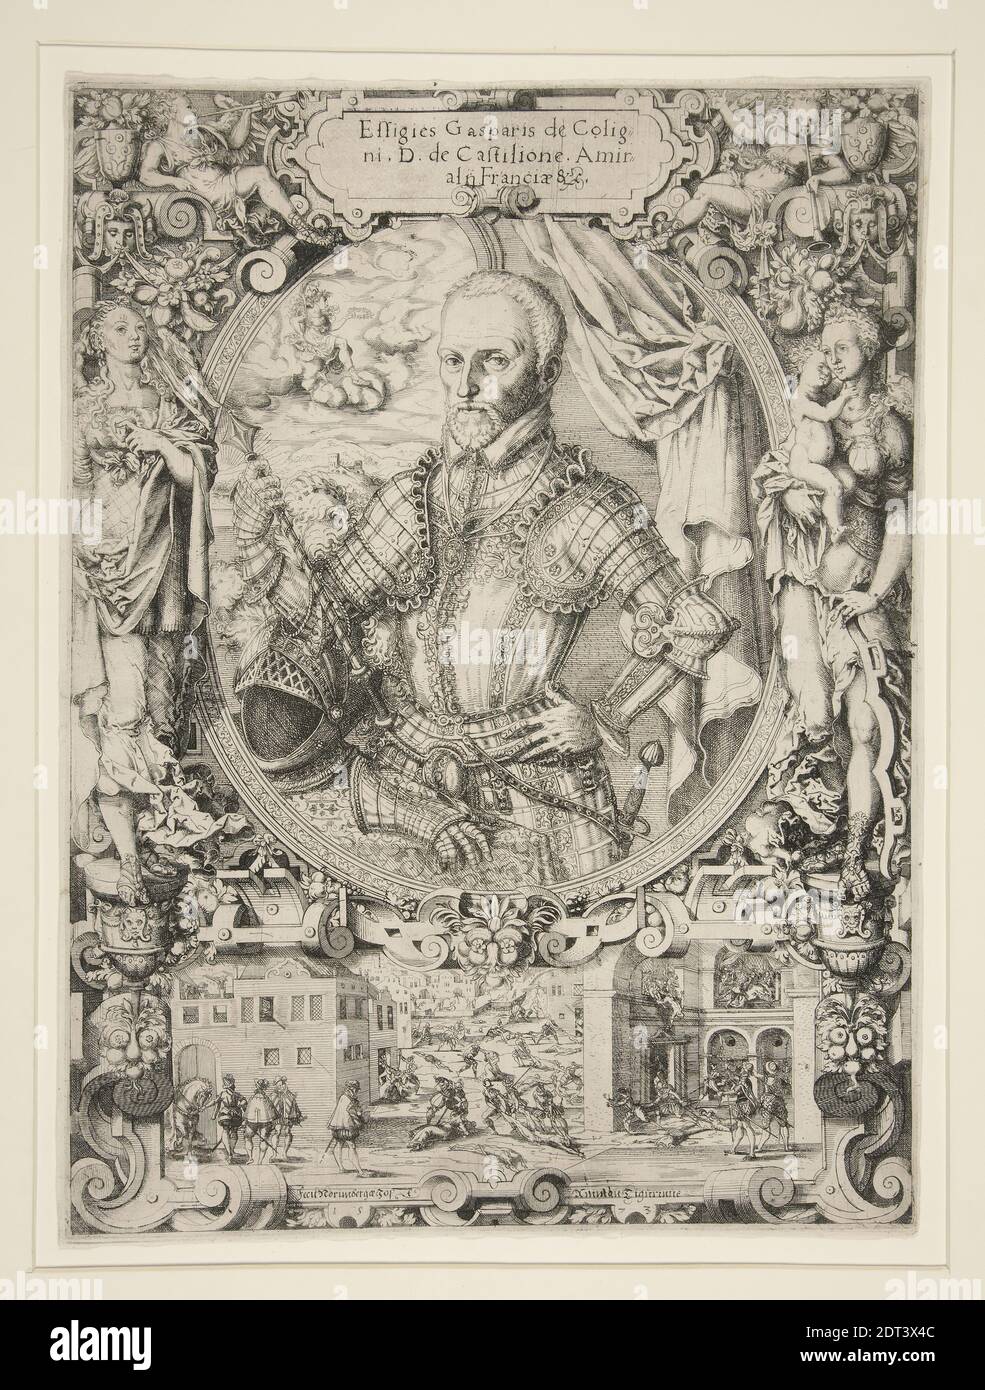 Artist: Jost Amman, Swiss, 1539–1591, active Germany, Gaspard de Coligny, Admiral of France, Etching, Made in Germany, German, 16th century, Works on Paper - Prints Stock Photo